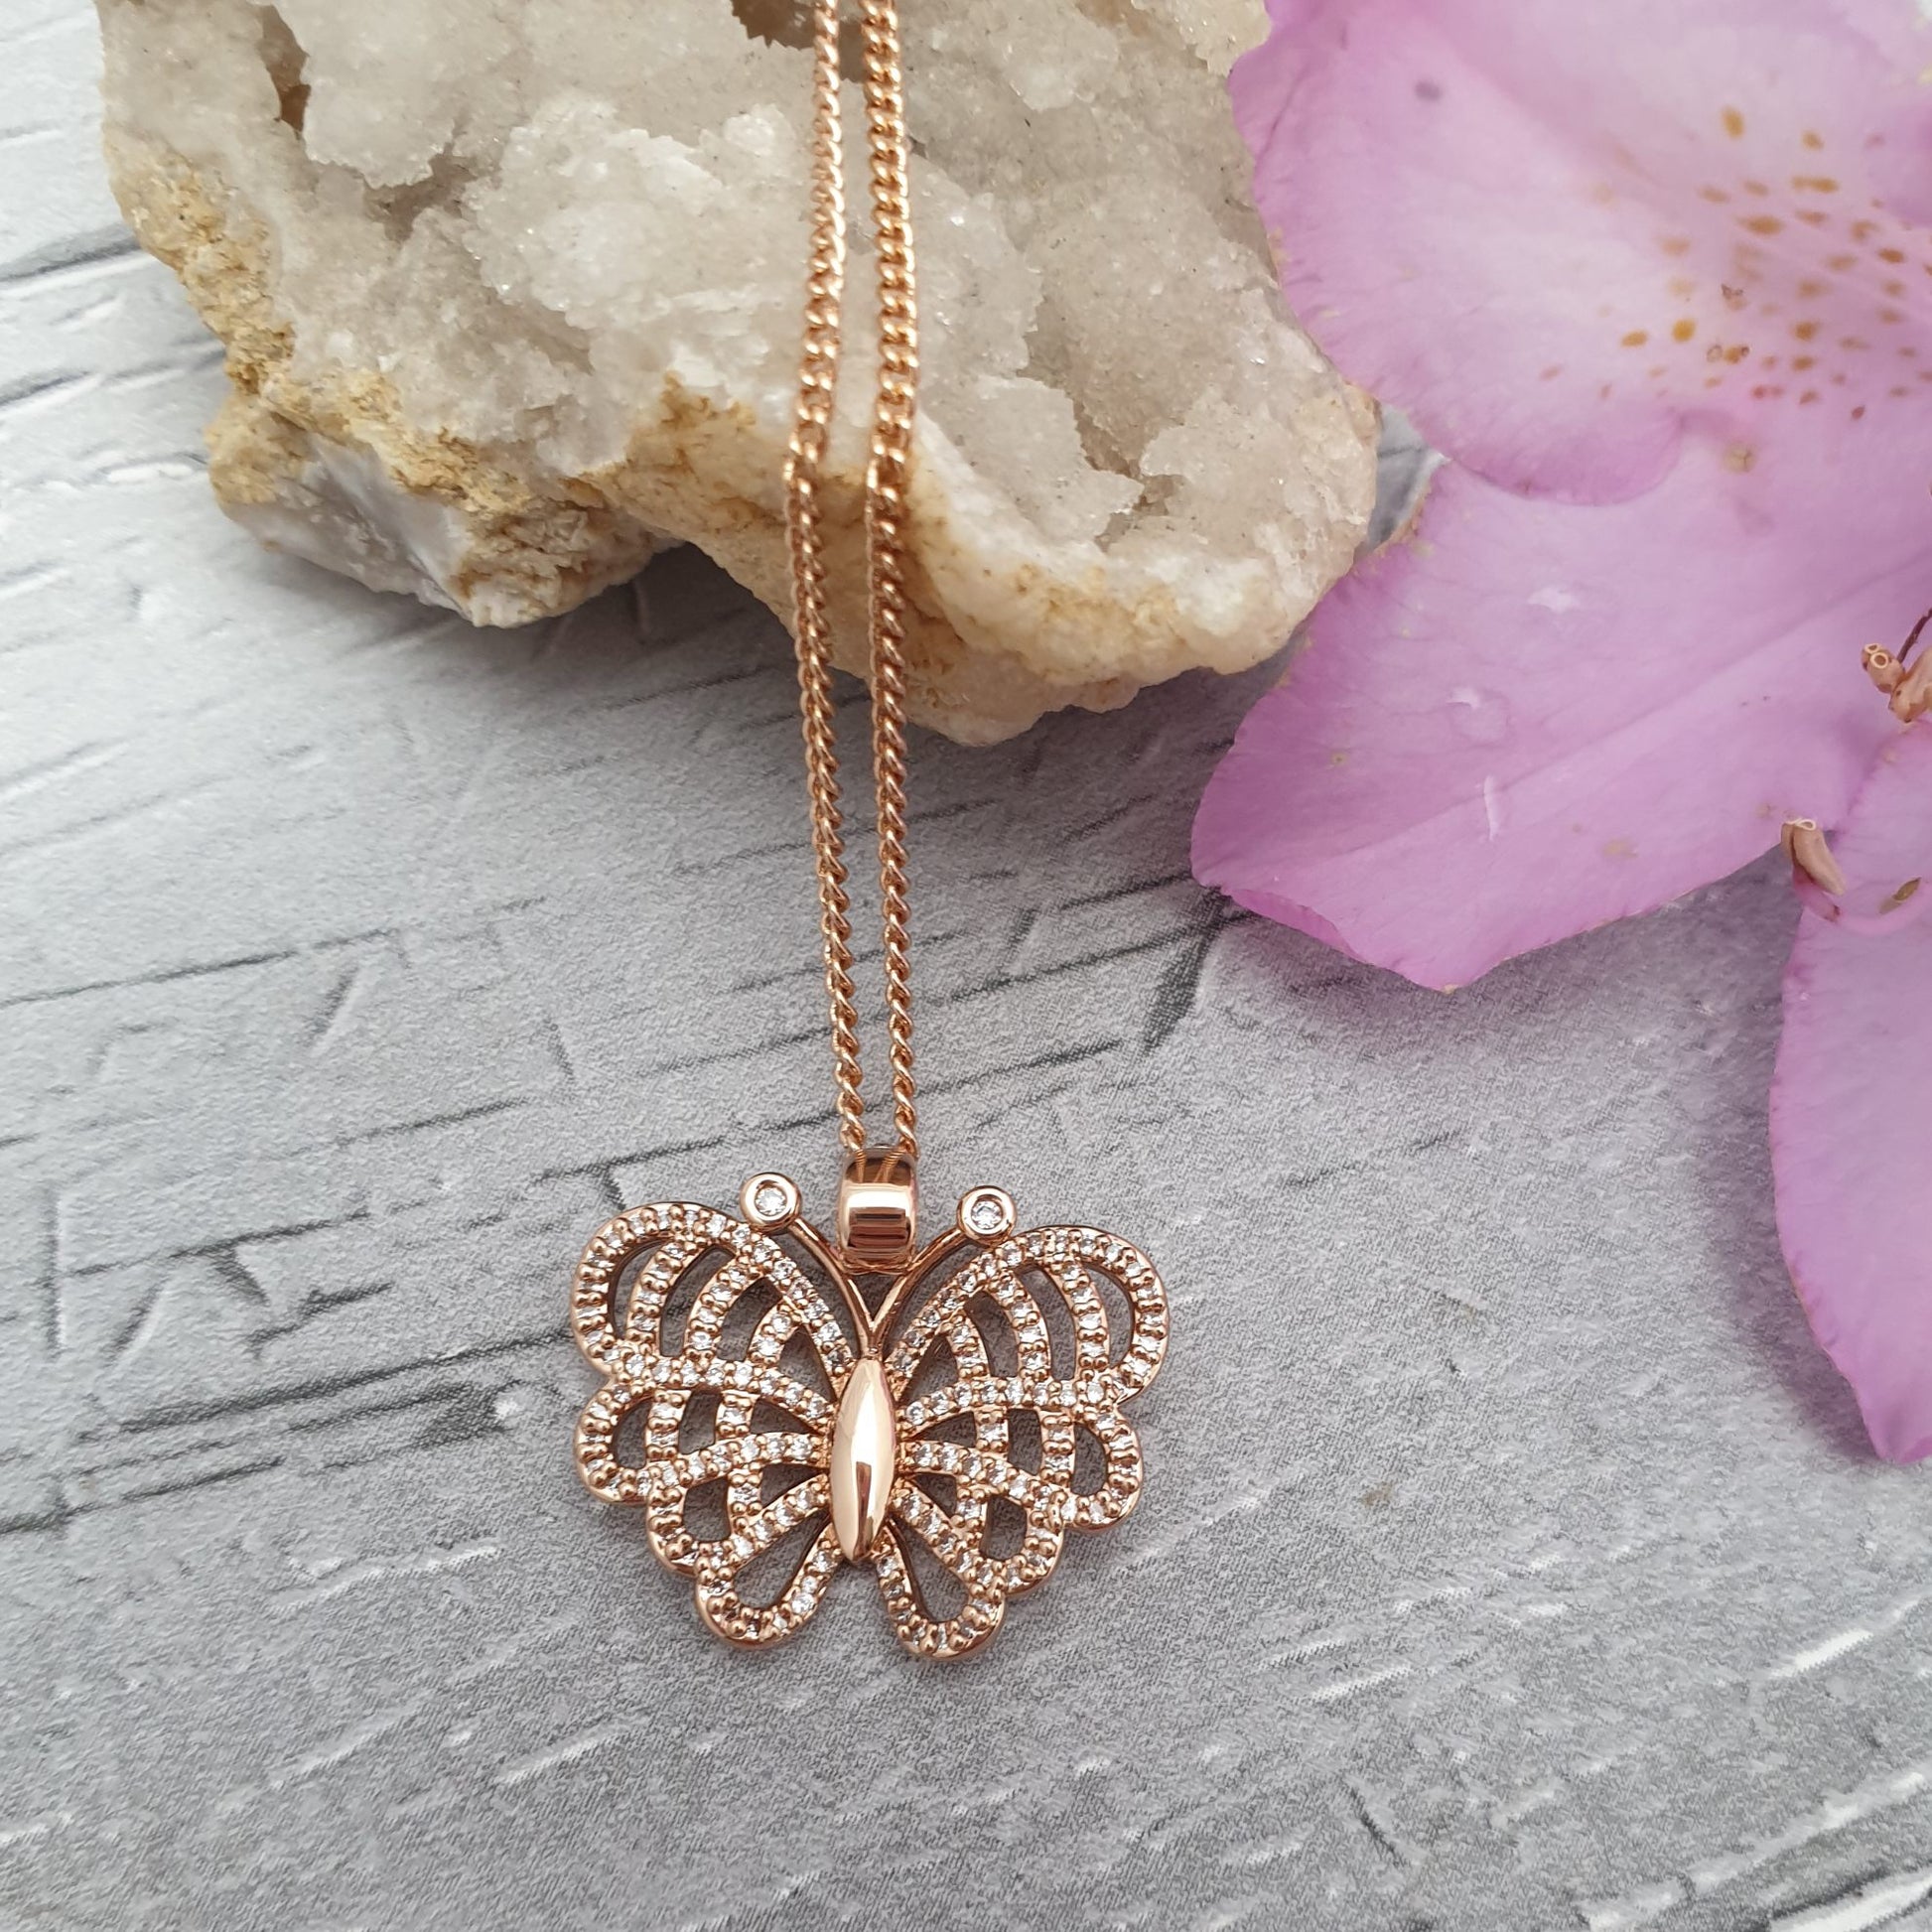 A rose gold coloured chain and pendant necklace. The pendant is an exotic looking butterfly with open wings decorated in diamante crystals